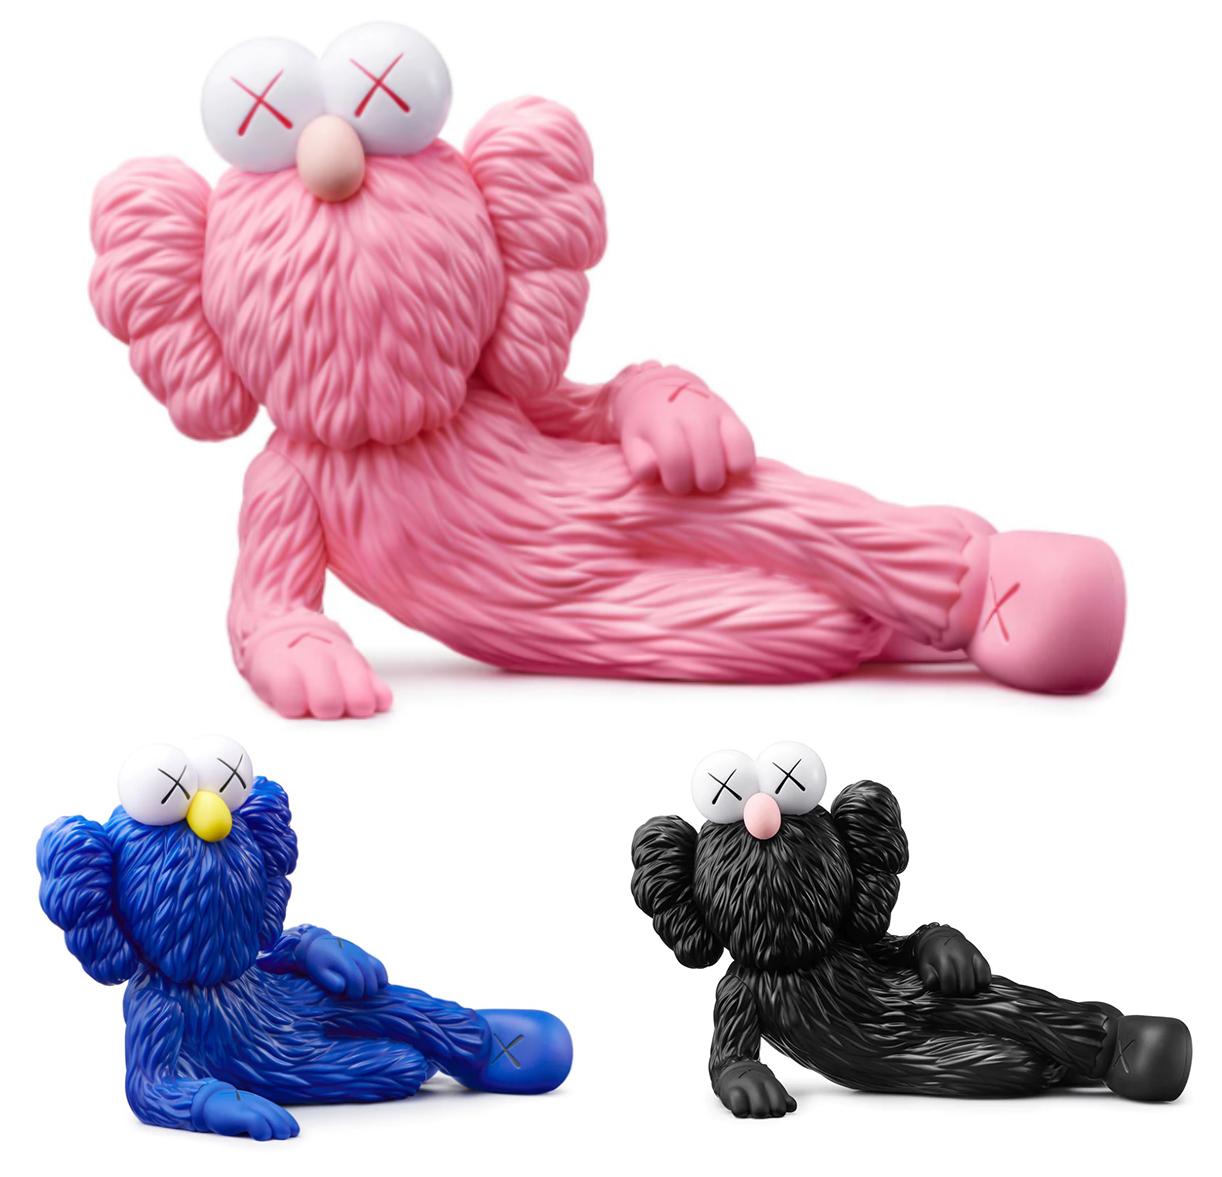 KAWS TIME OFF (complete set of 3 works):
A highly decorative KAWS Companion set featuring KAWS’ much popularized BFF Companion in a resting position. These brightly colored, highly collectible KAWS Companion art toys were published ahead of the